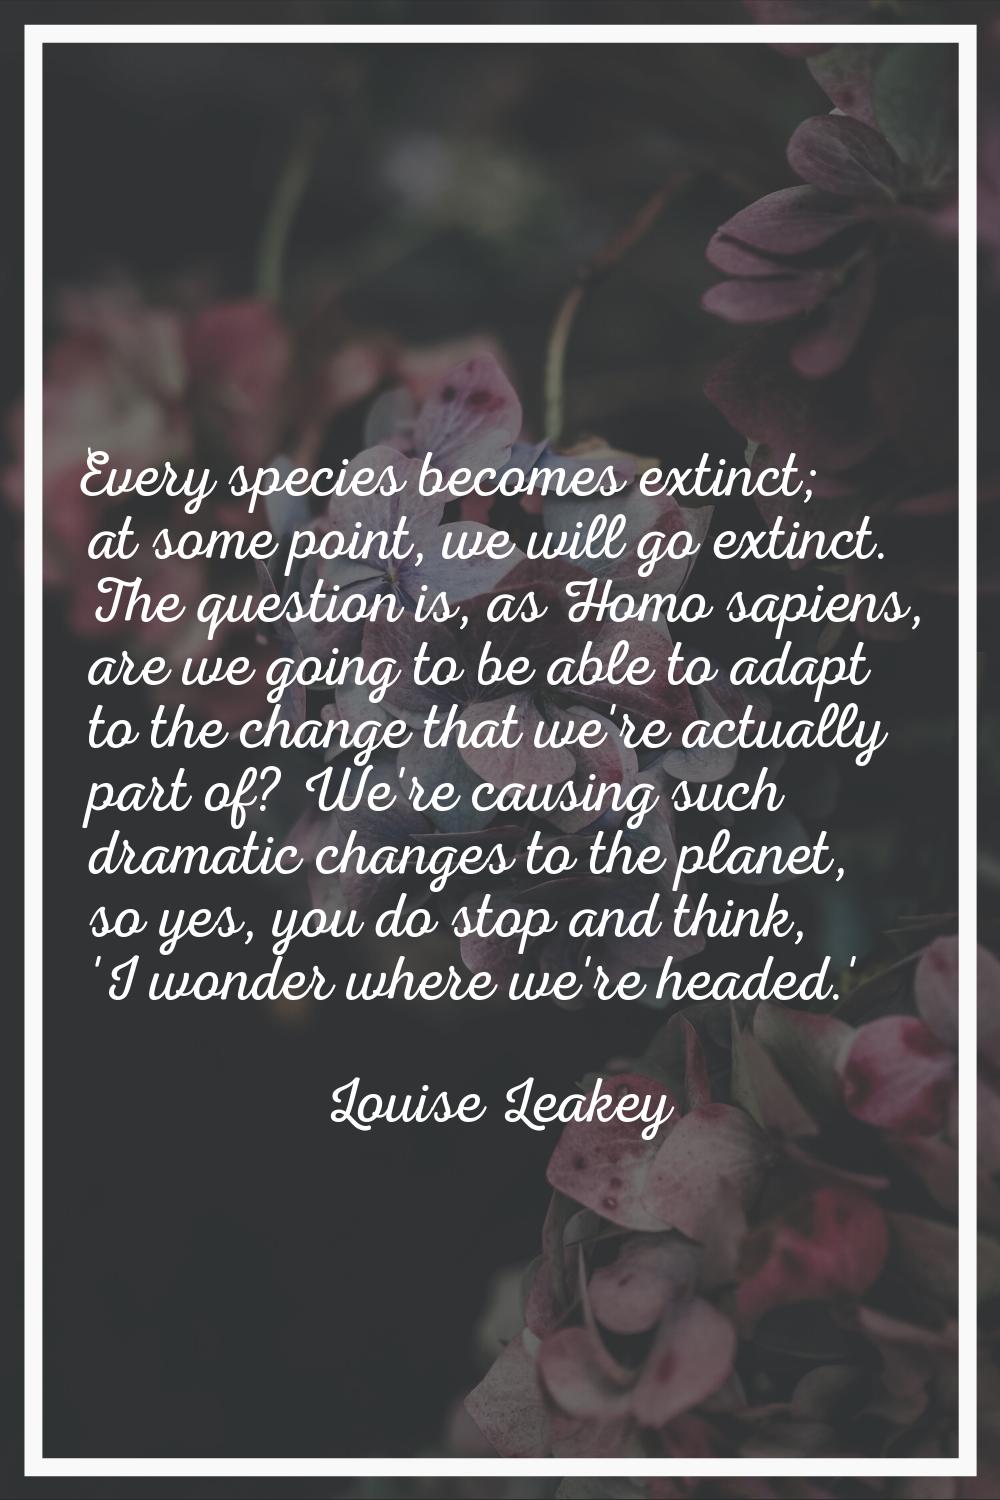 Every species becomes extinct; at some point, we will go extinct. The question is, as Homo sapiens,